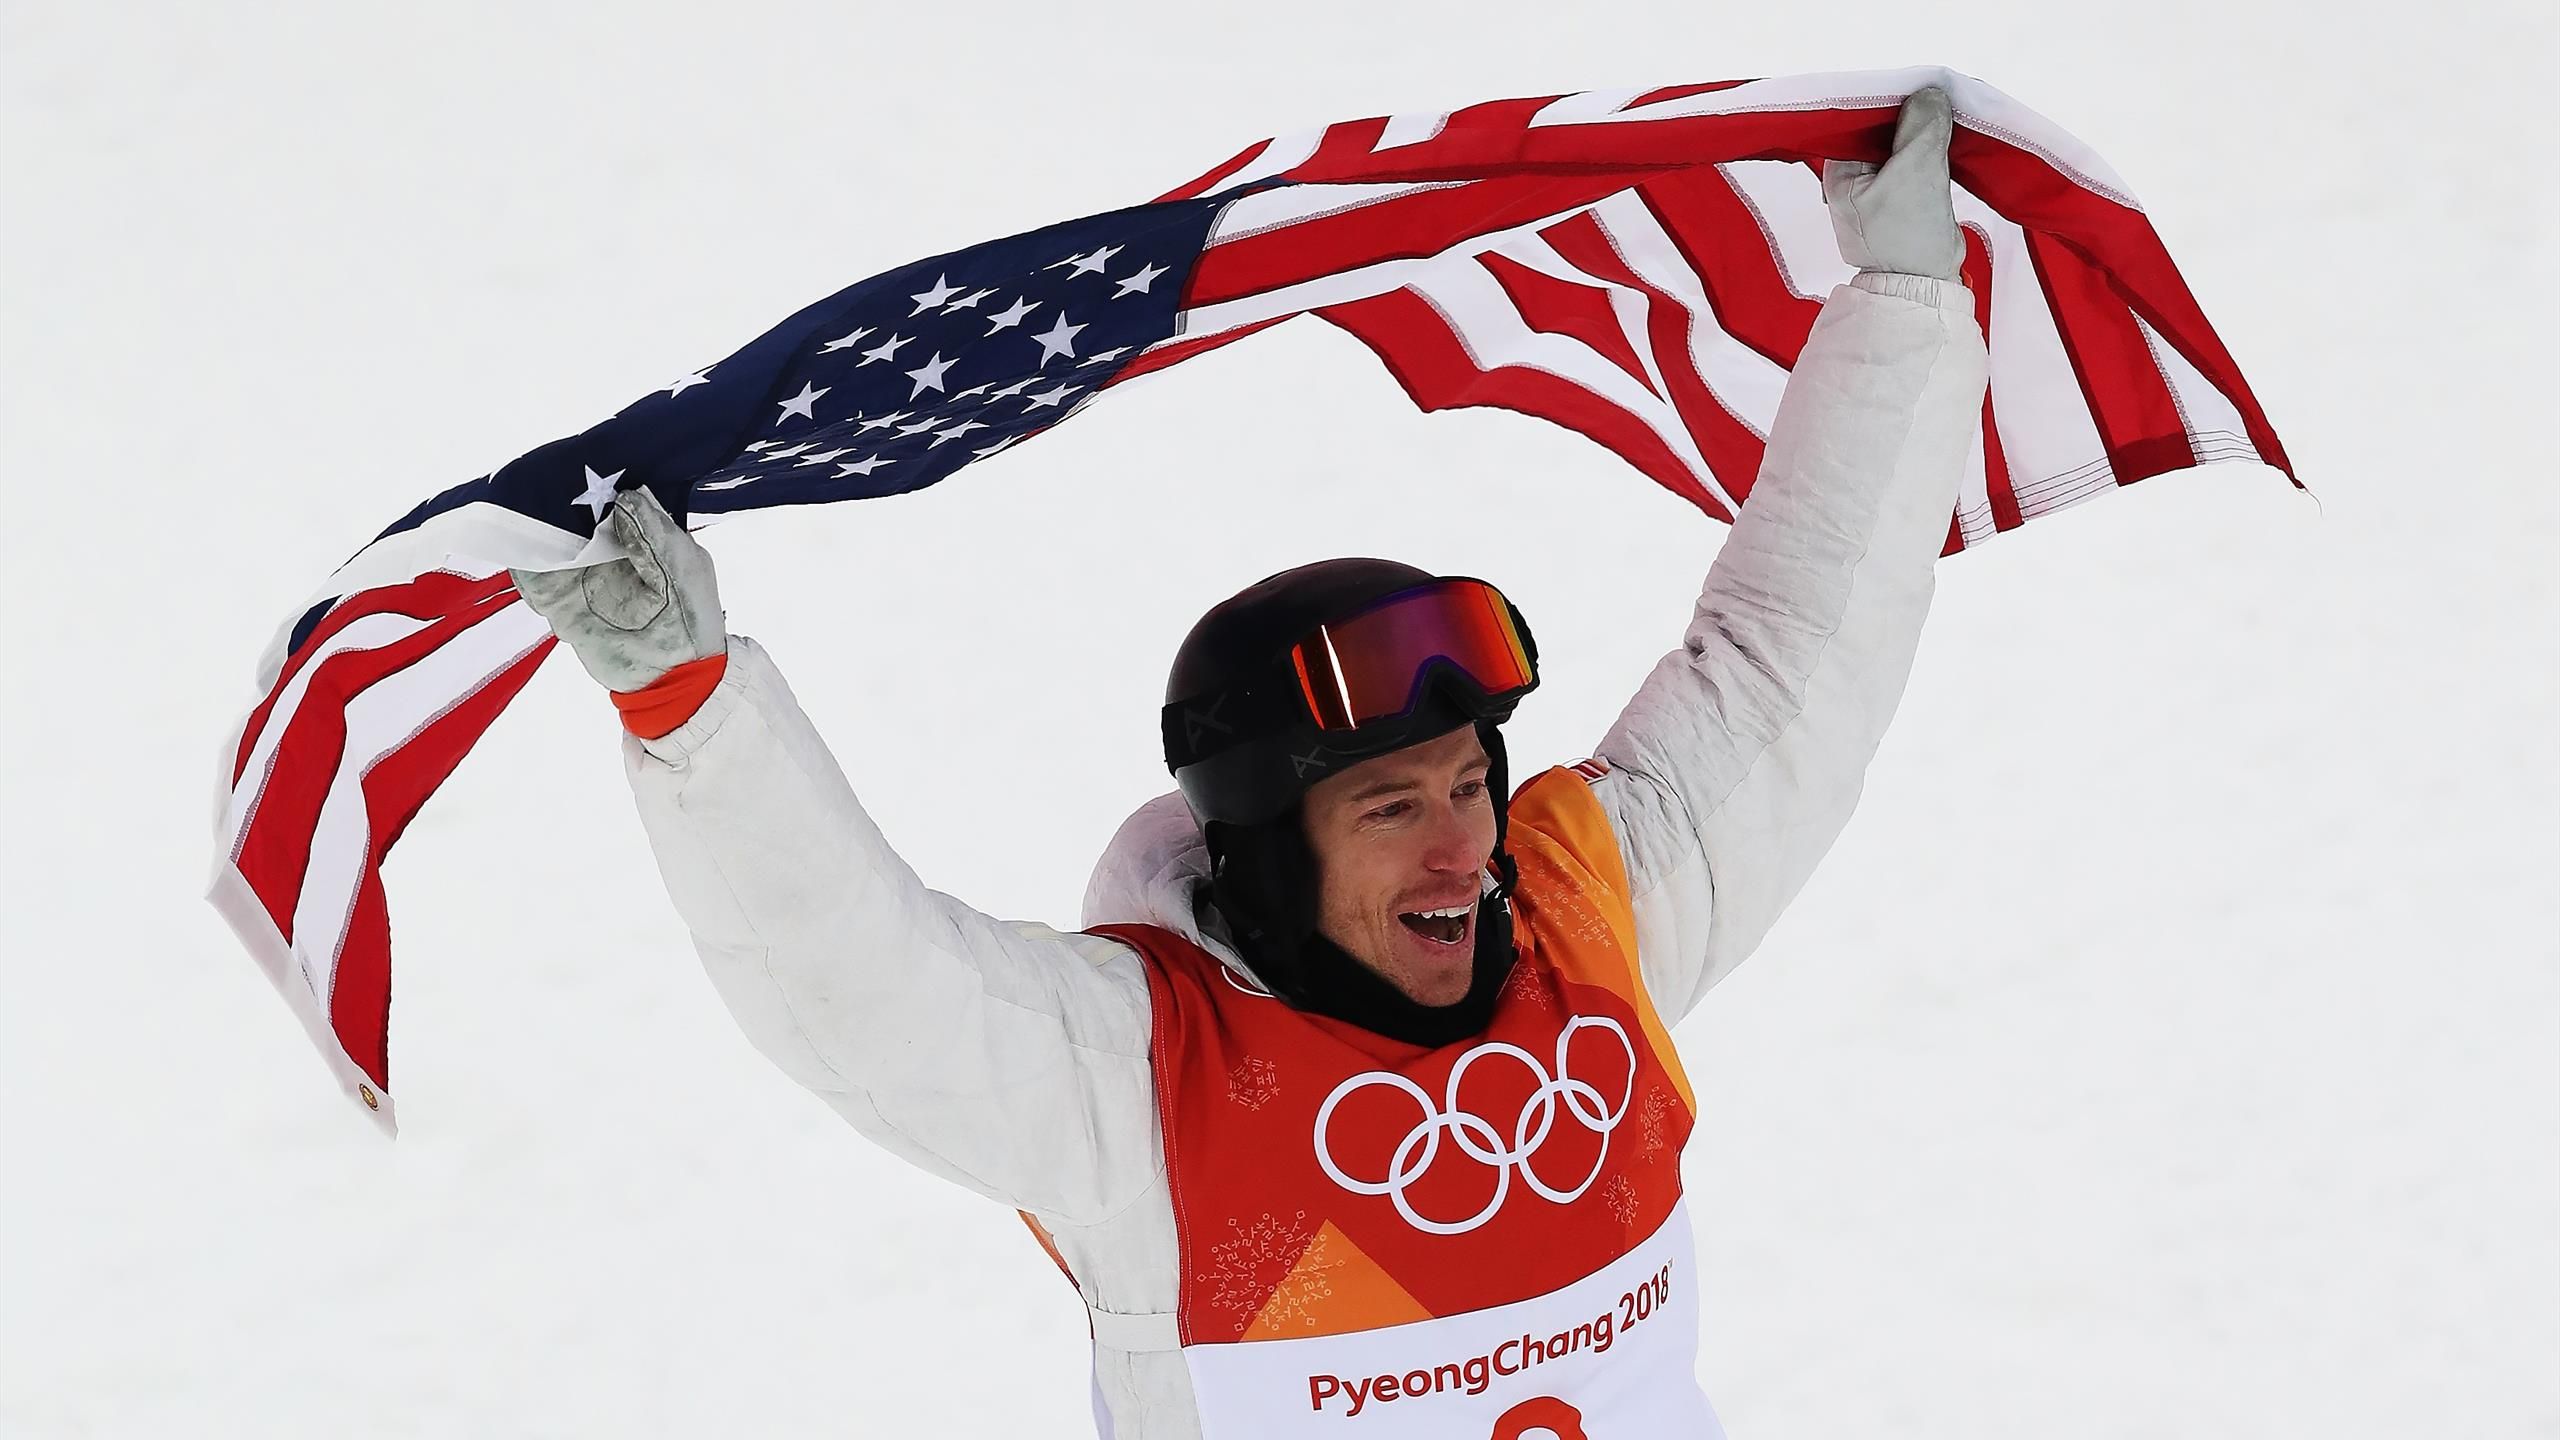 The Rise of Shaun White: A Look at the Snowboarding Legend's